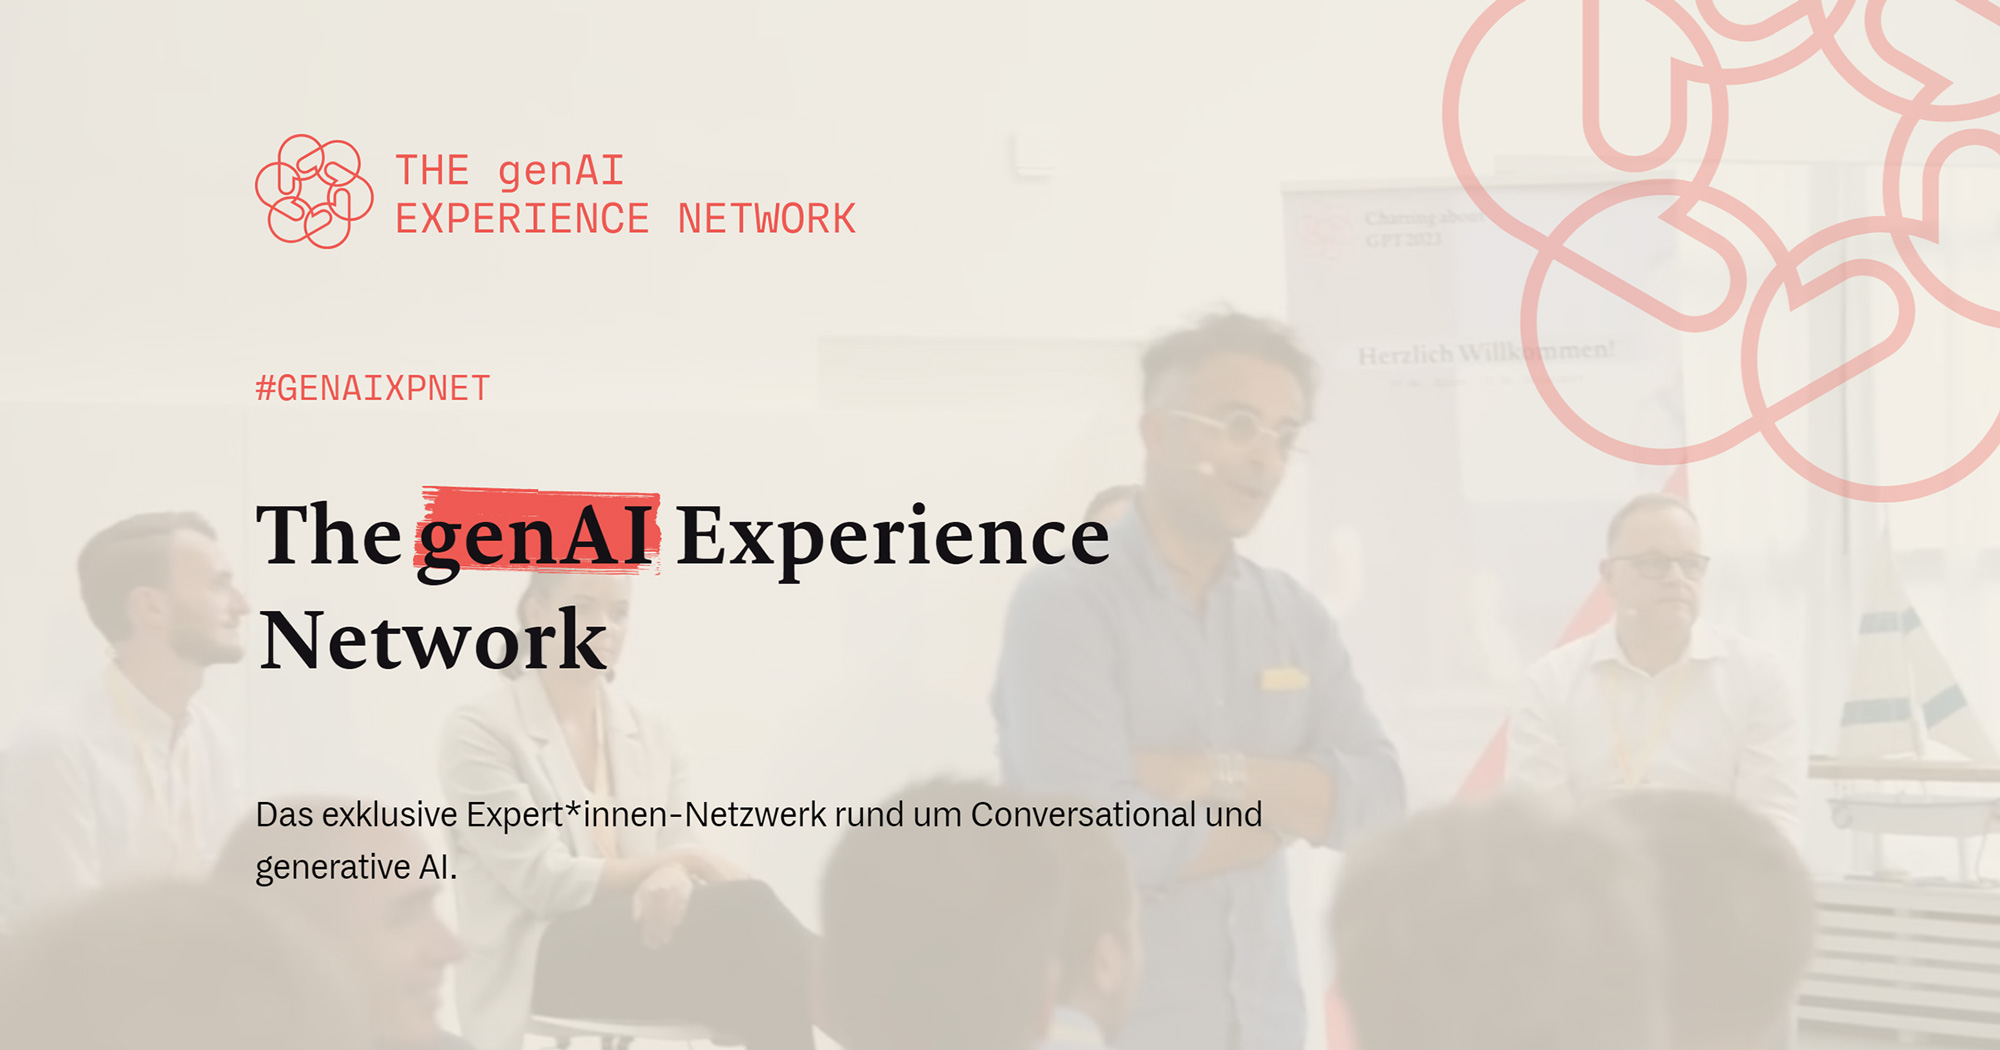 (c) Experience-network.ai